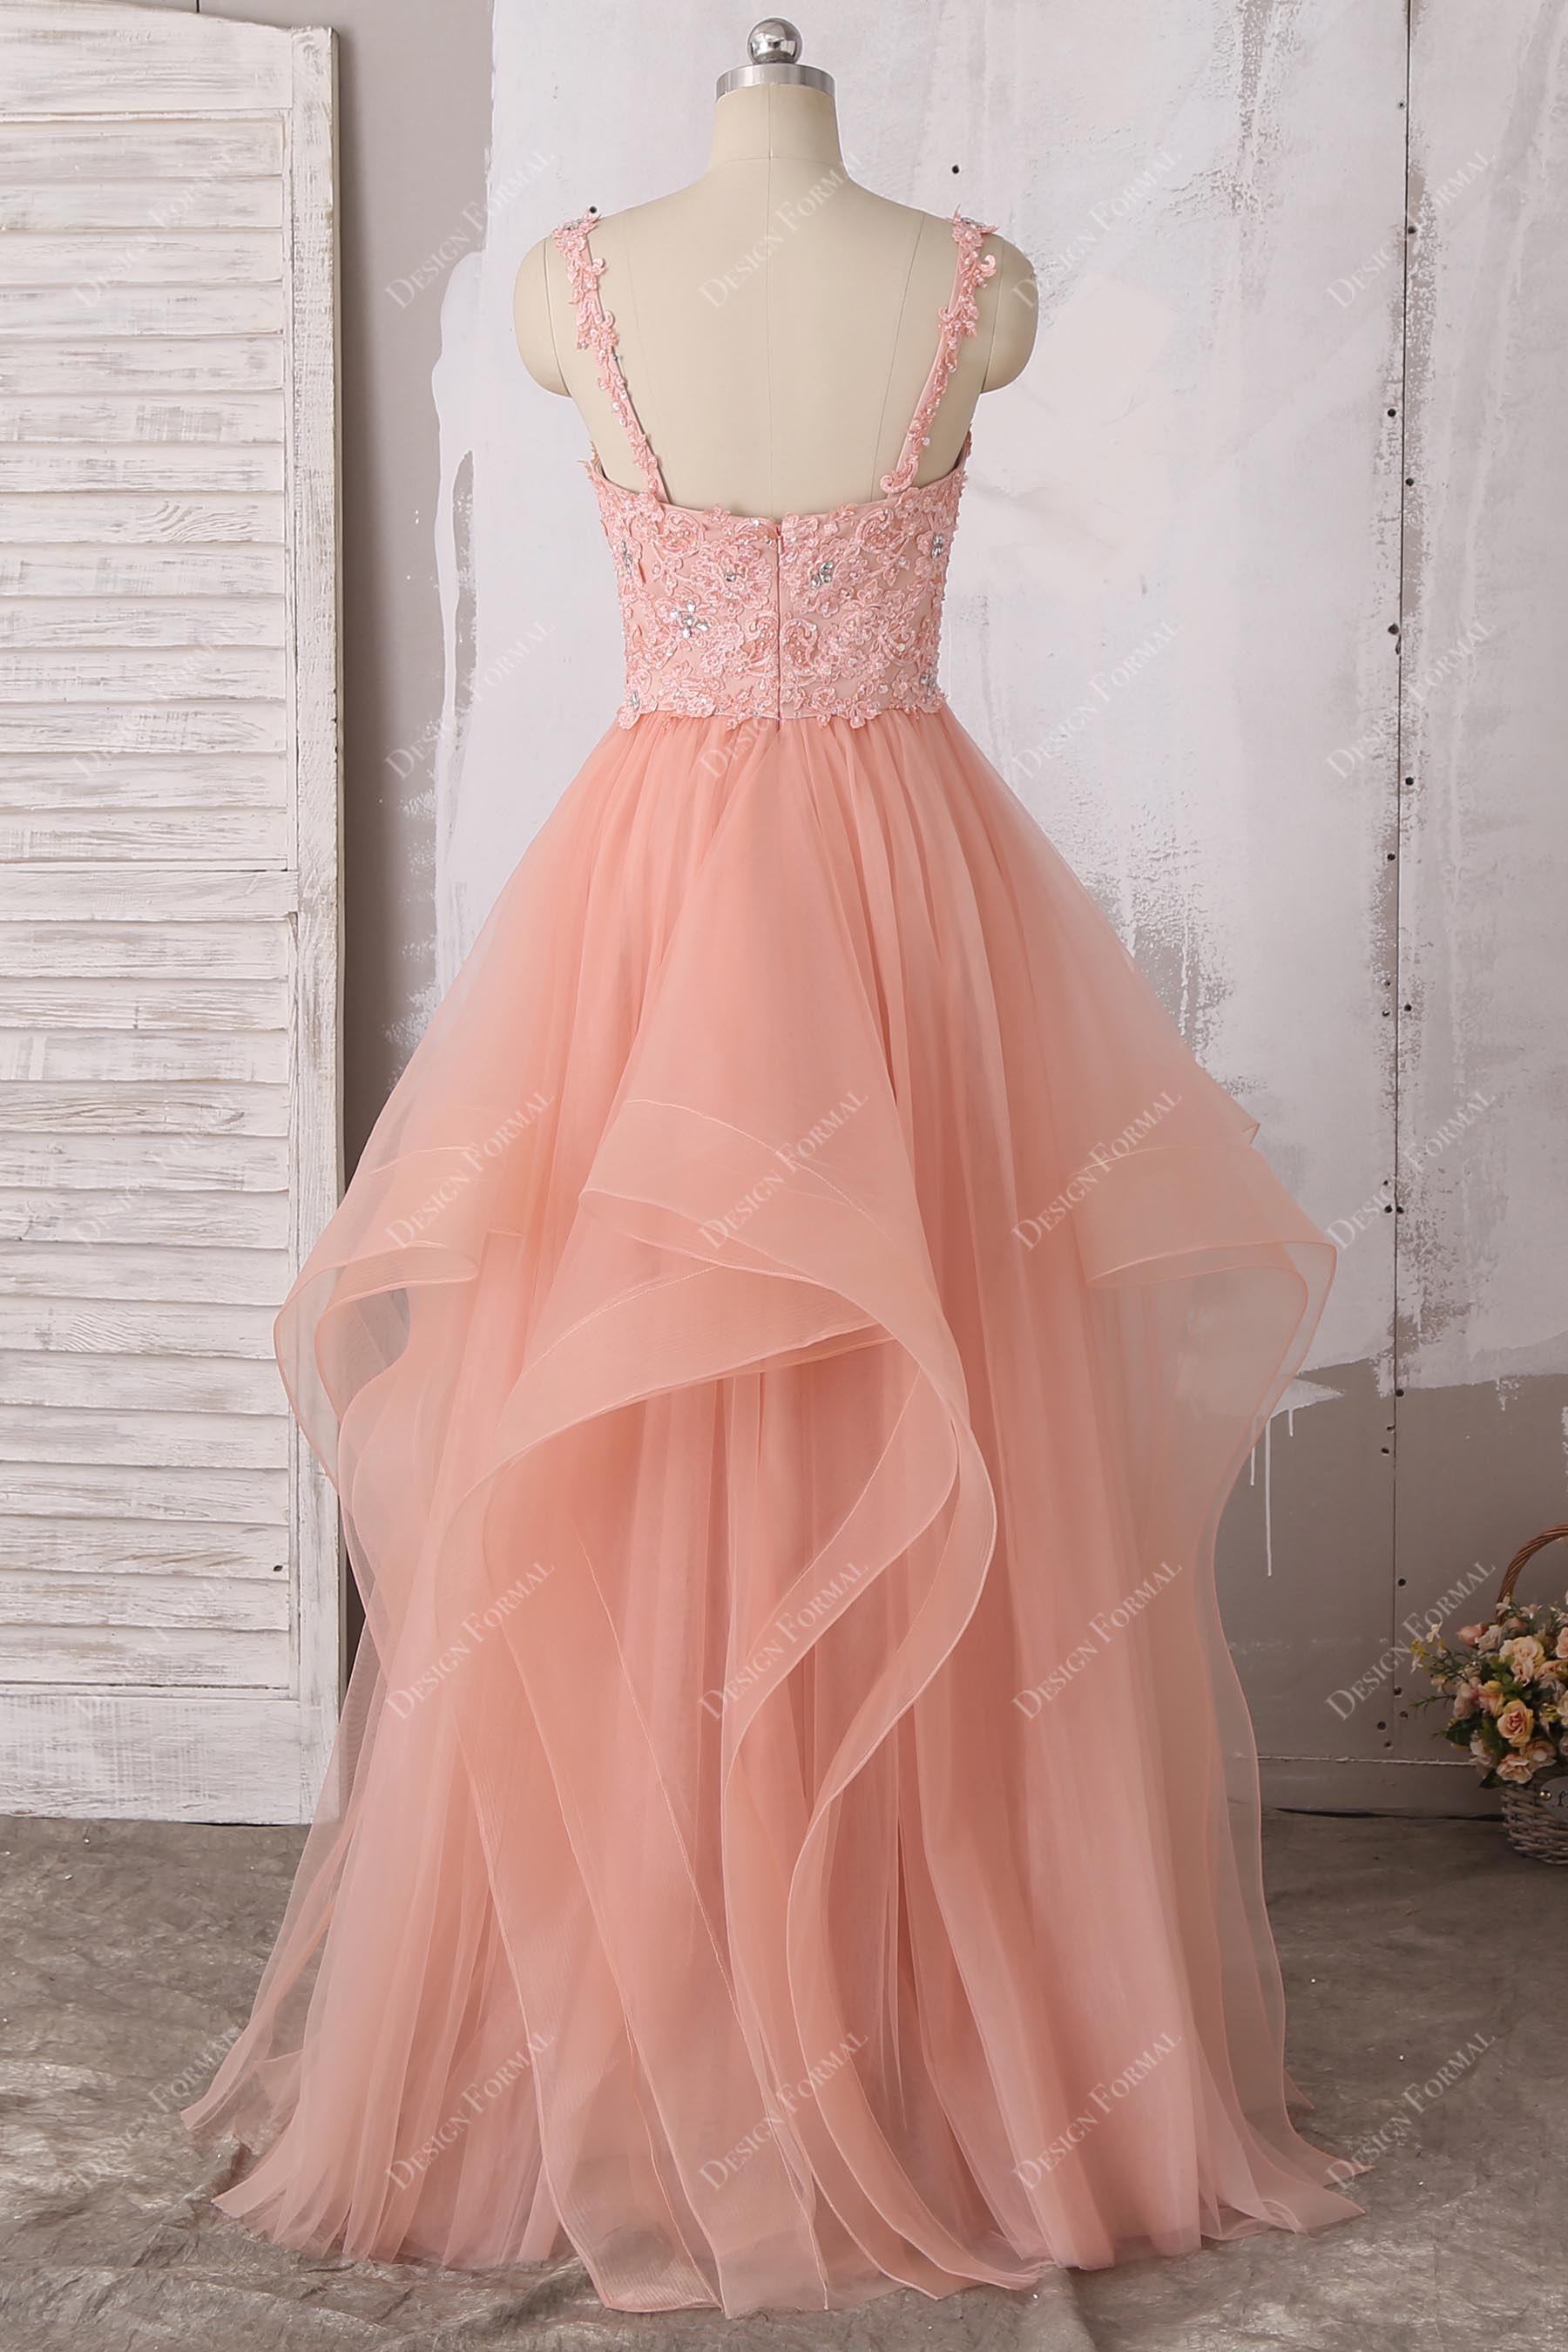 open back ruffled ball gown prom dress